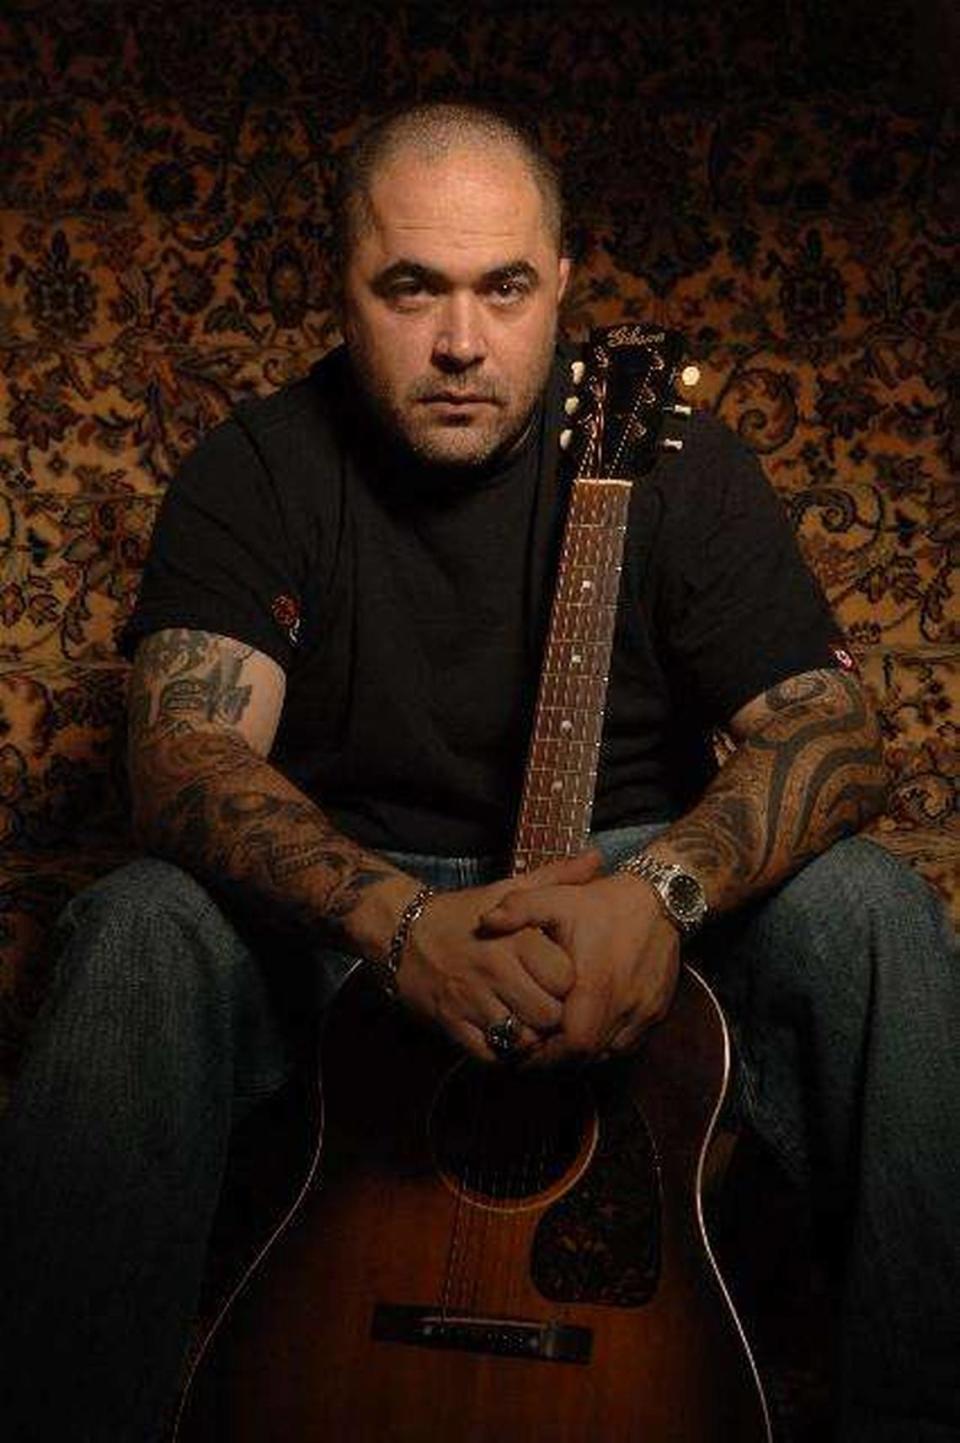 Country singer Aaron Lewis will perform Nov. 4 at the Ameristar.